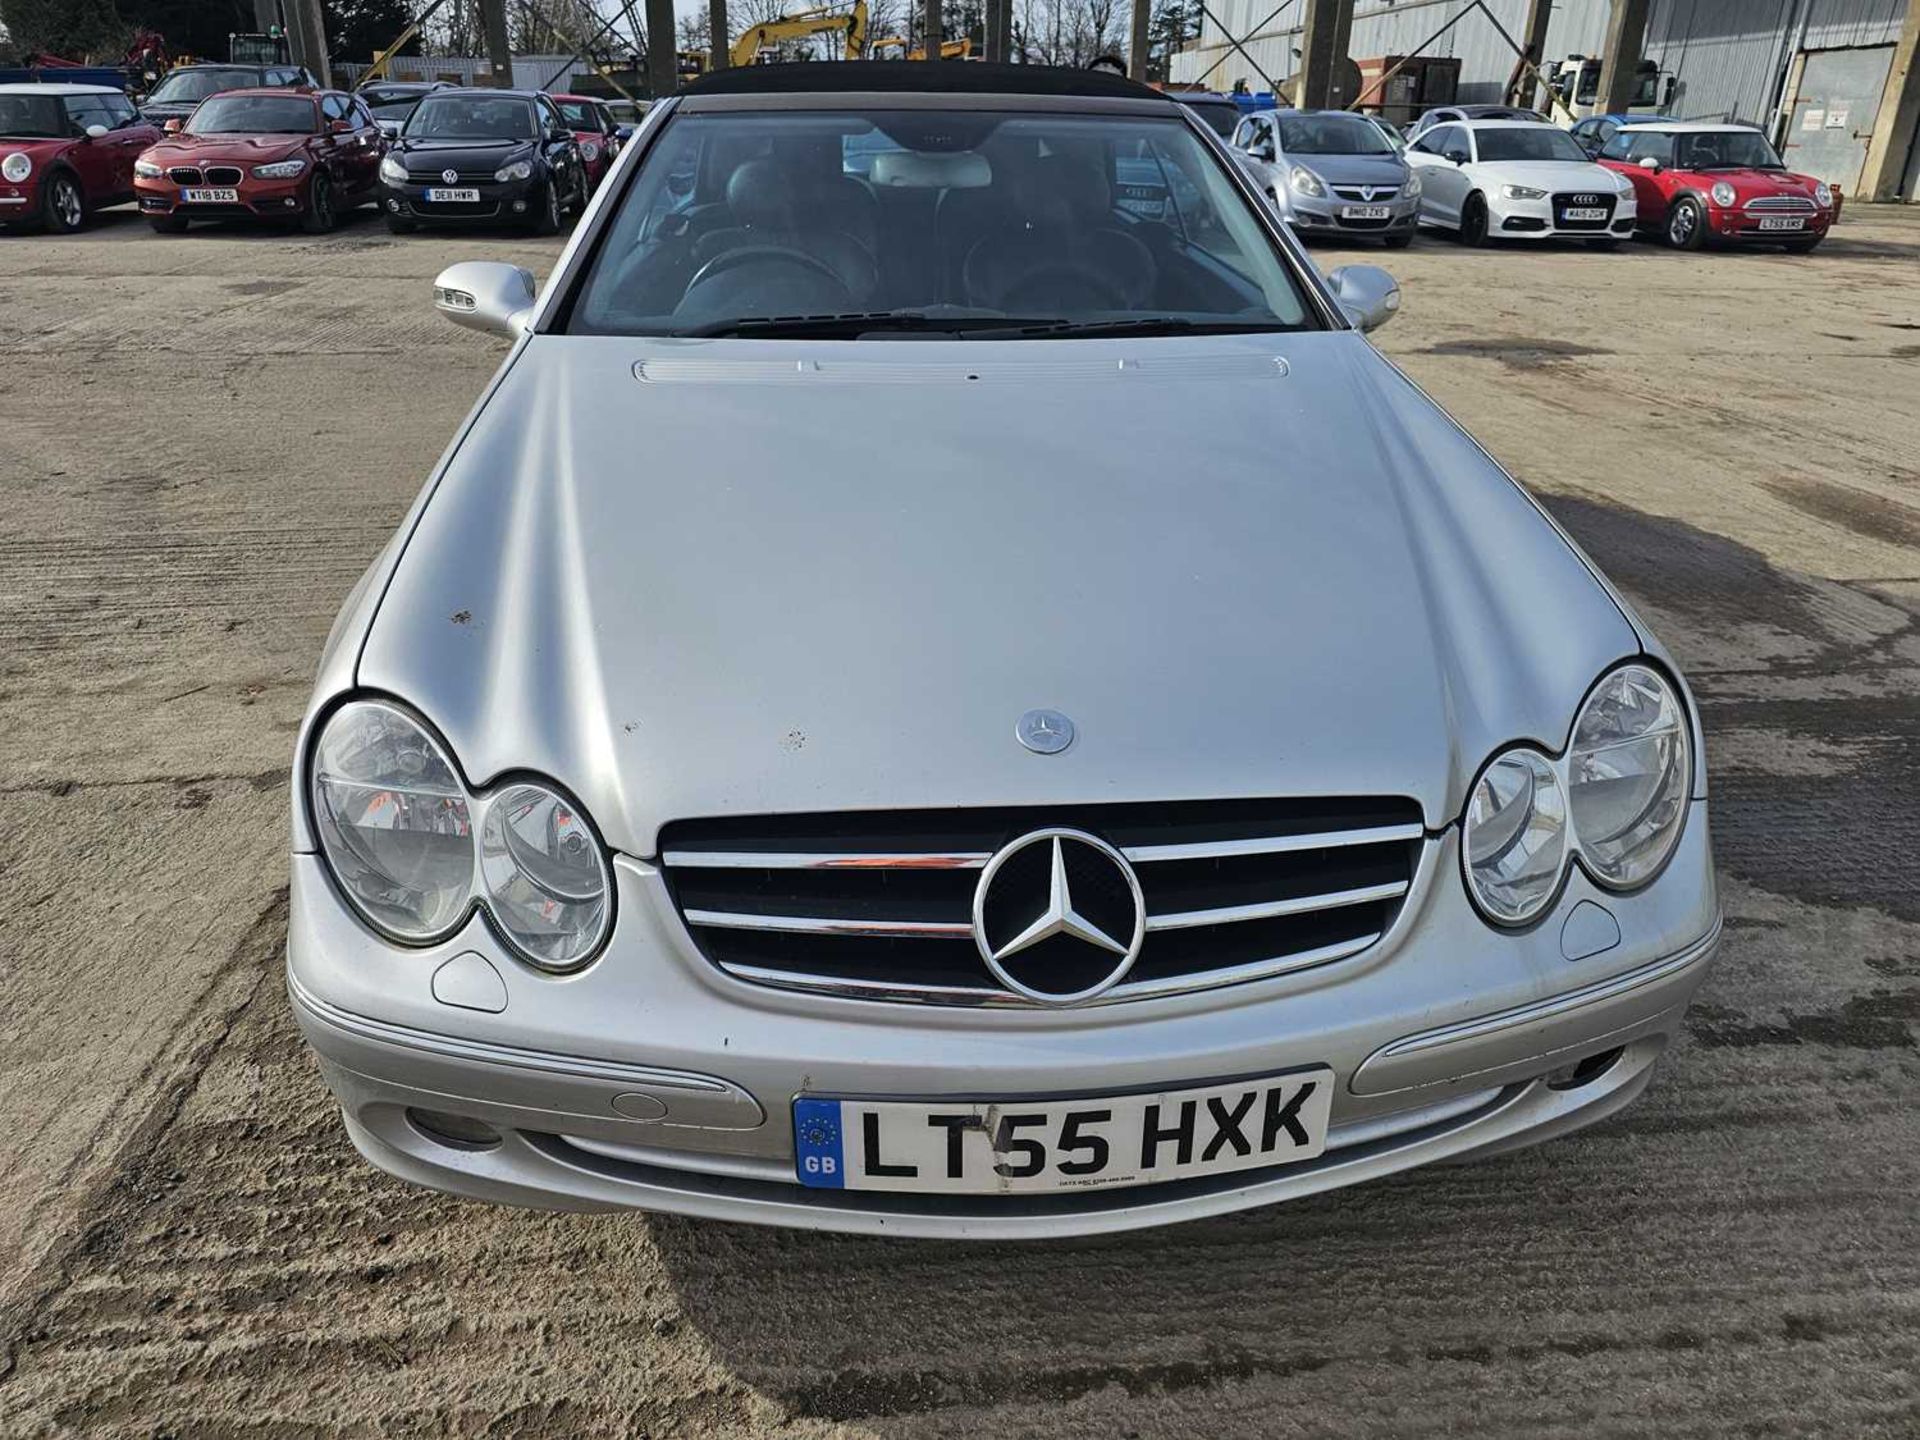 2005 Mercedes CLK200 Kompressor, Convertible, Auto, Full Leather, Bluetooth, Cruise Control, Climate - Image 4 of 29